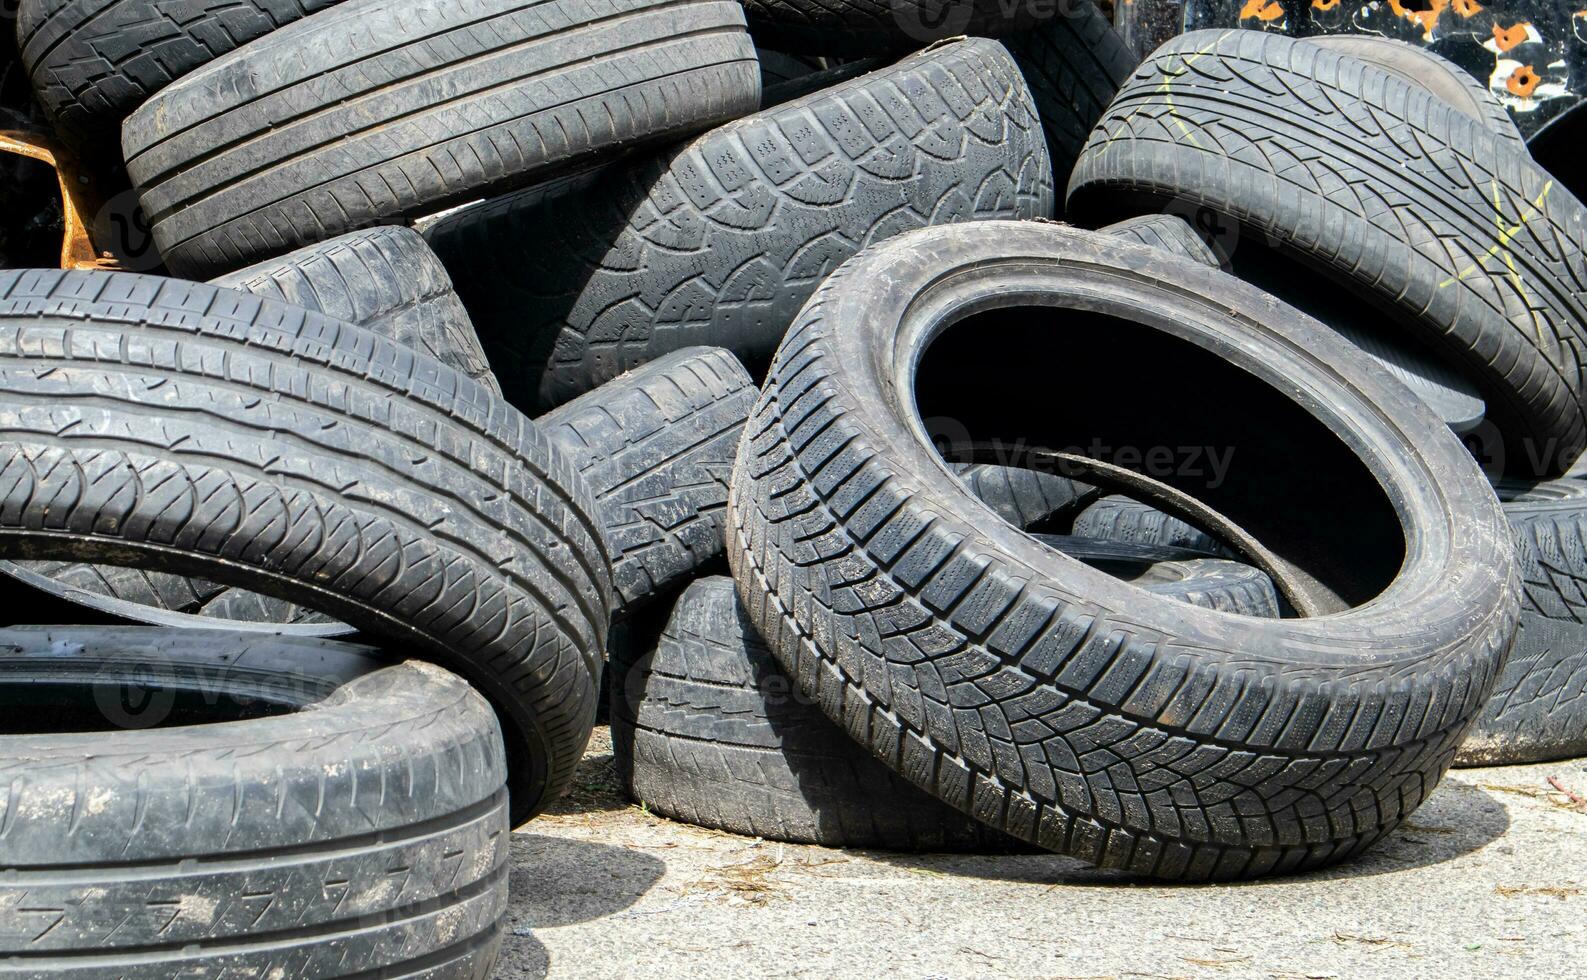 Industrial landfill for recycling used tires and rubber tires. Old used tires. A dump full of used car tires. The concept of recycling and environmental protection. photo